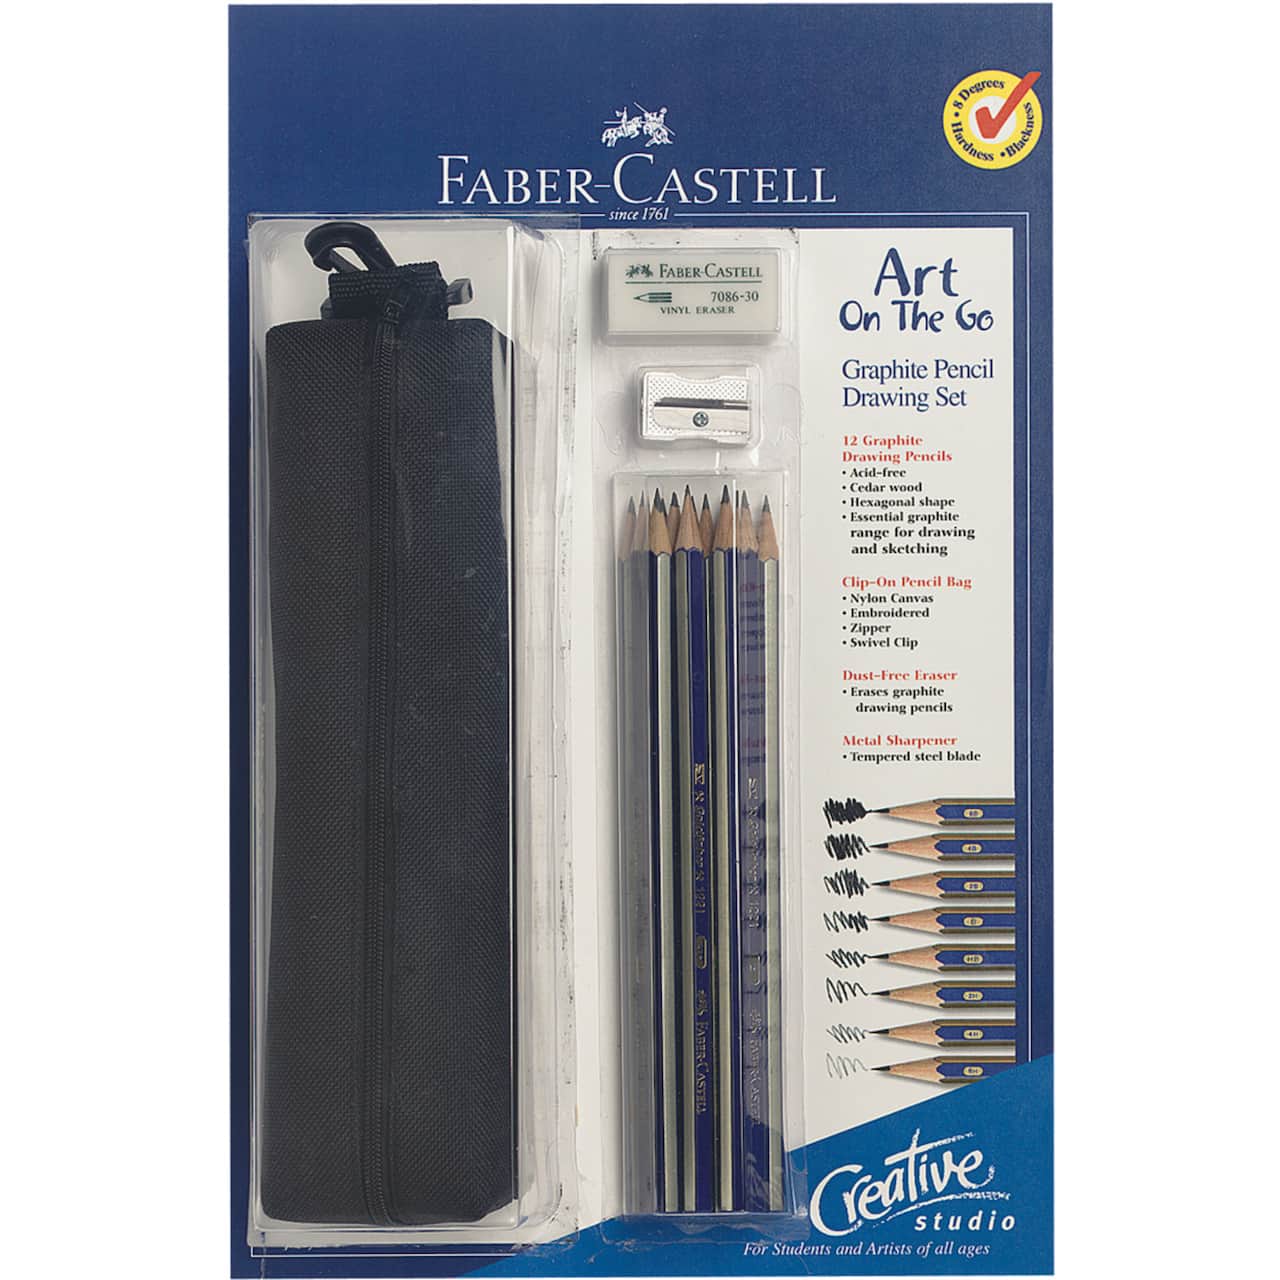 Faber-Castell Art On The Go Drawing Kit